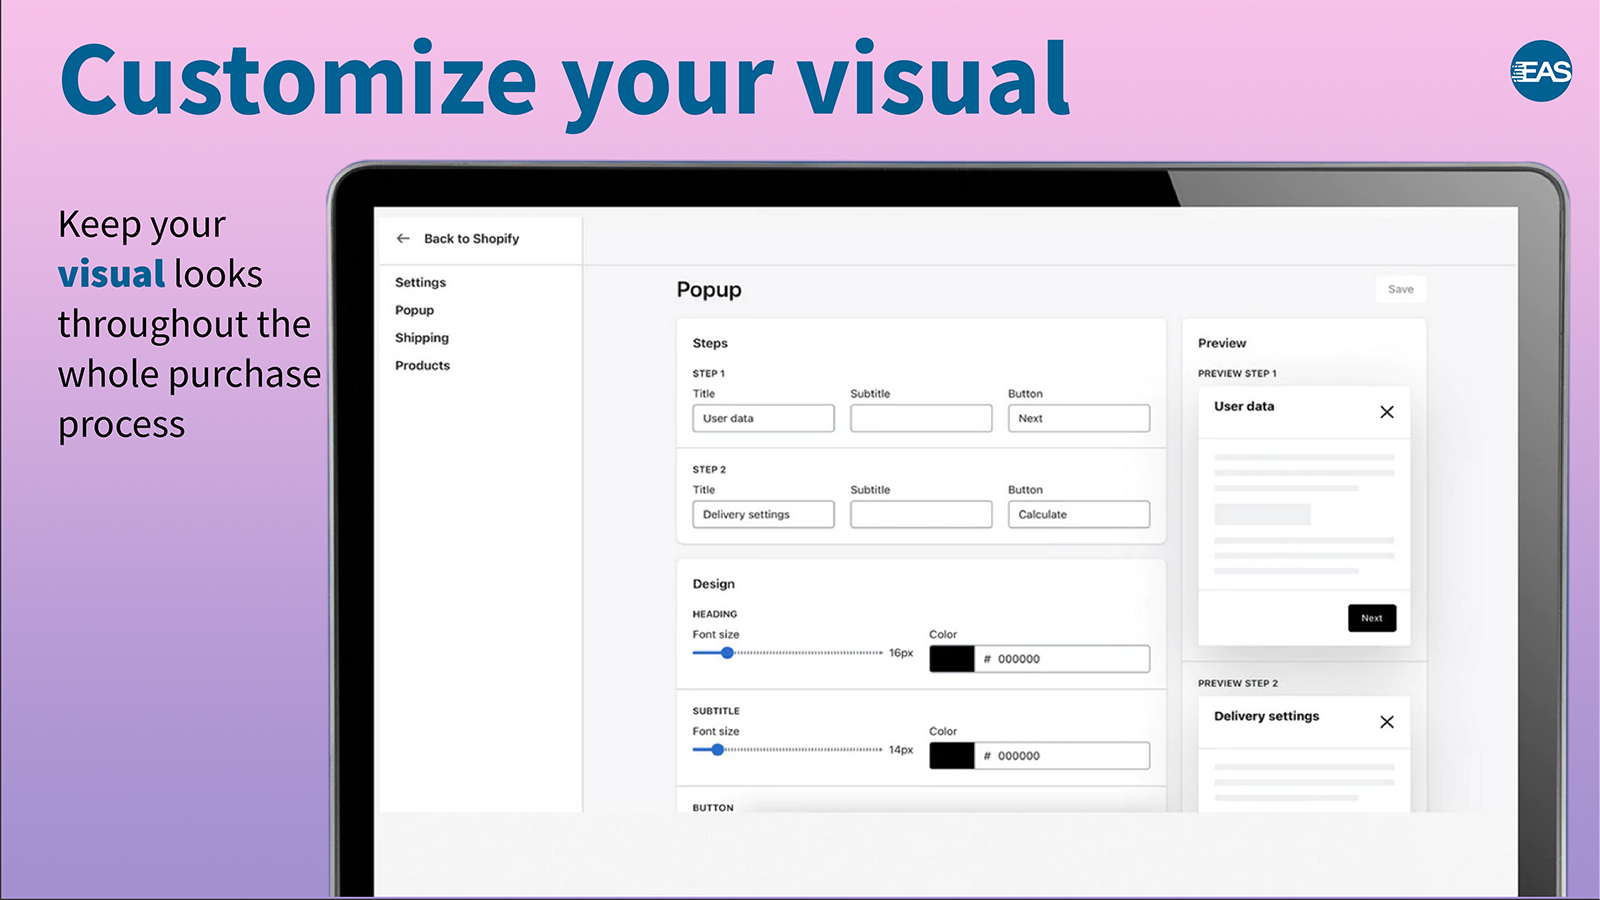 Dashboard can be visually customized for your preferences